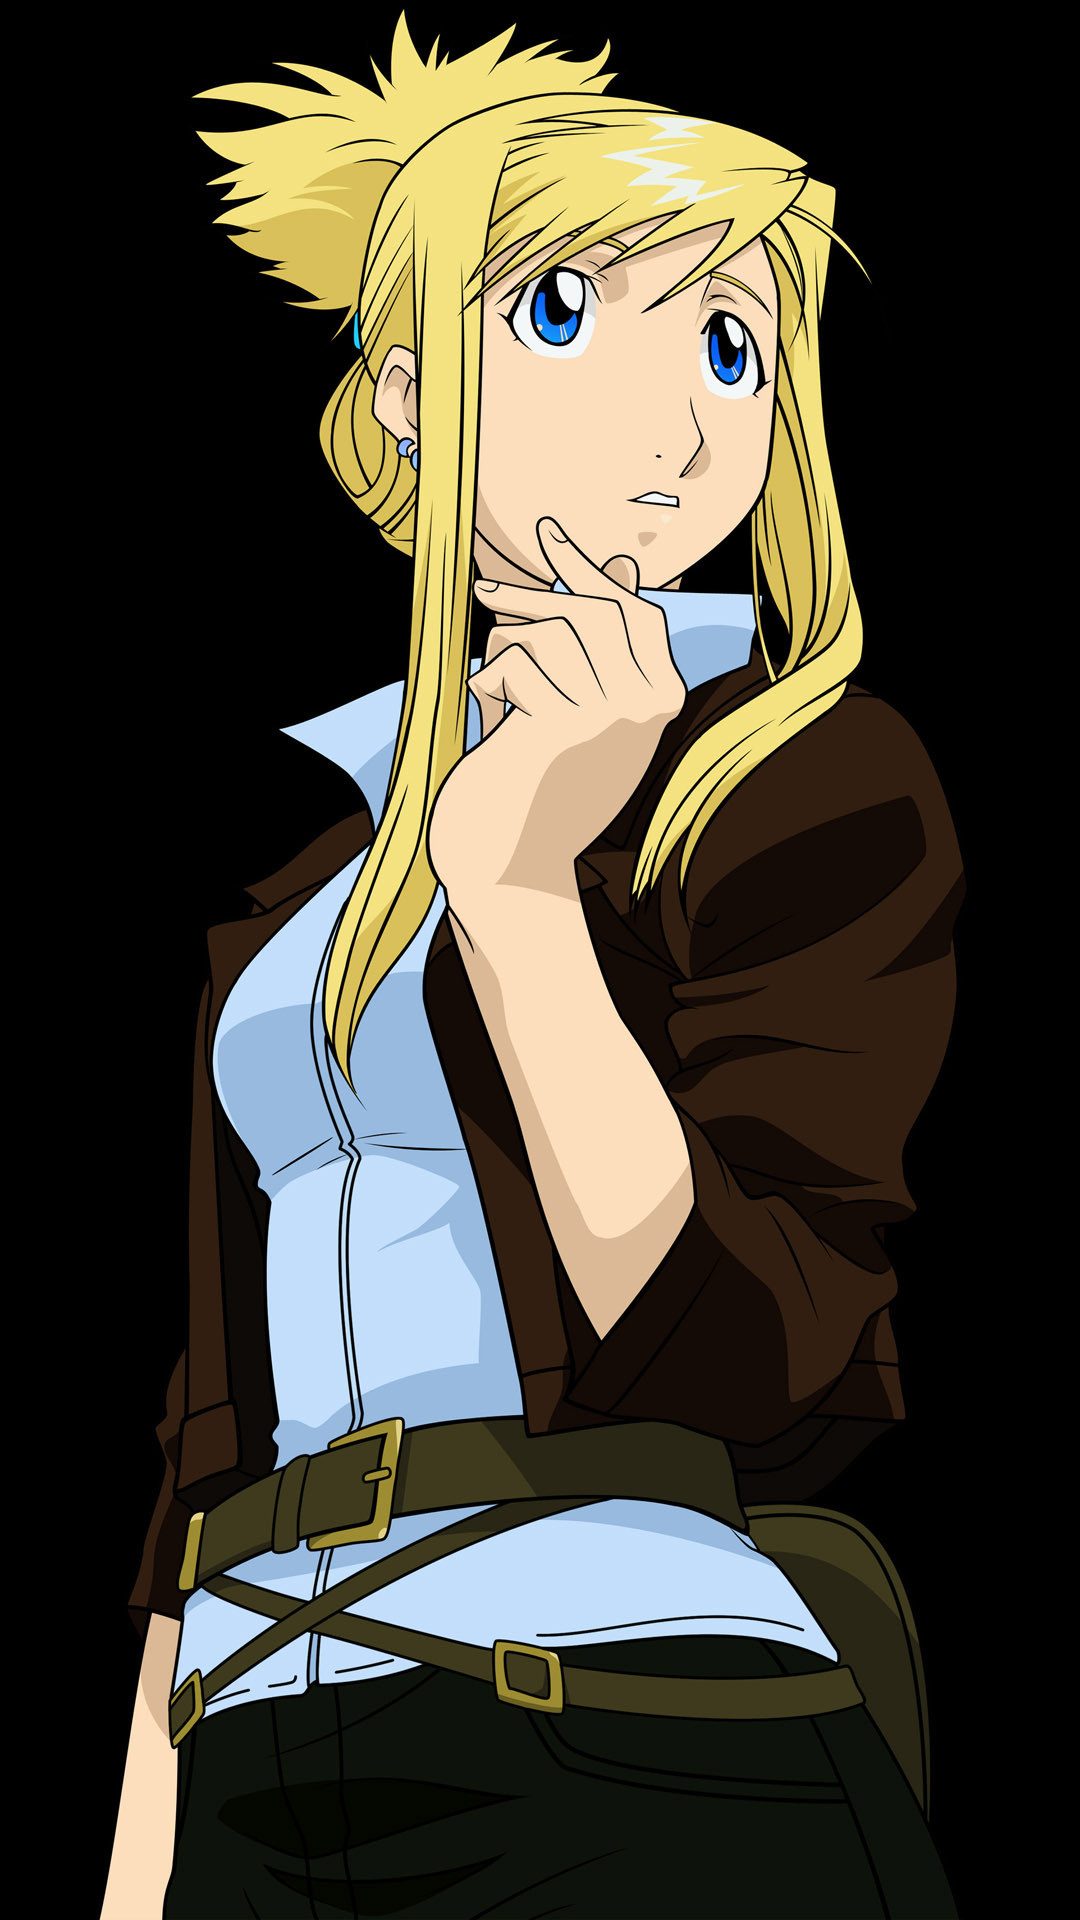 1080x1920 Winry Rockbell Wallpapers Wallpapers) – Wallpapers and Backgrounds